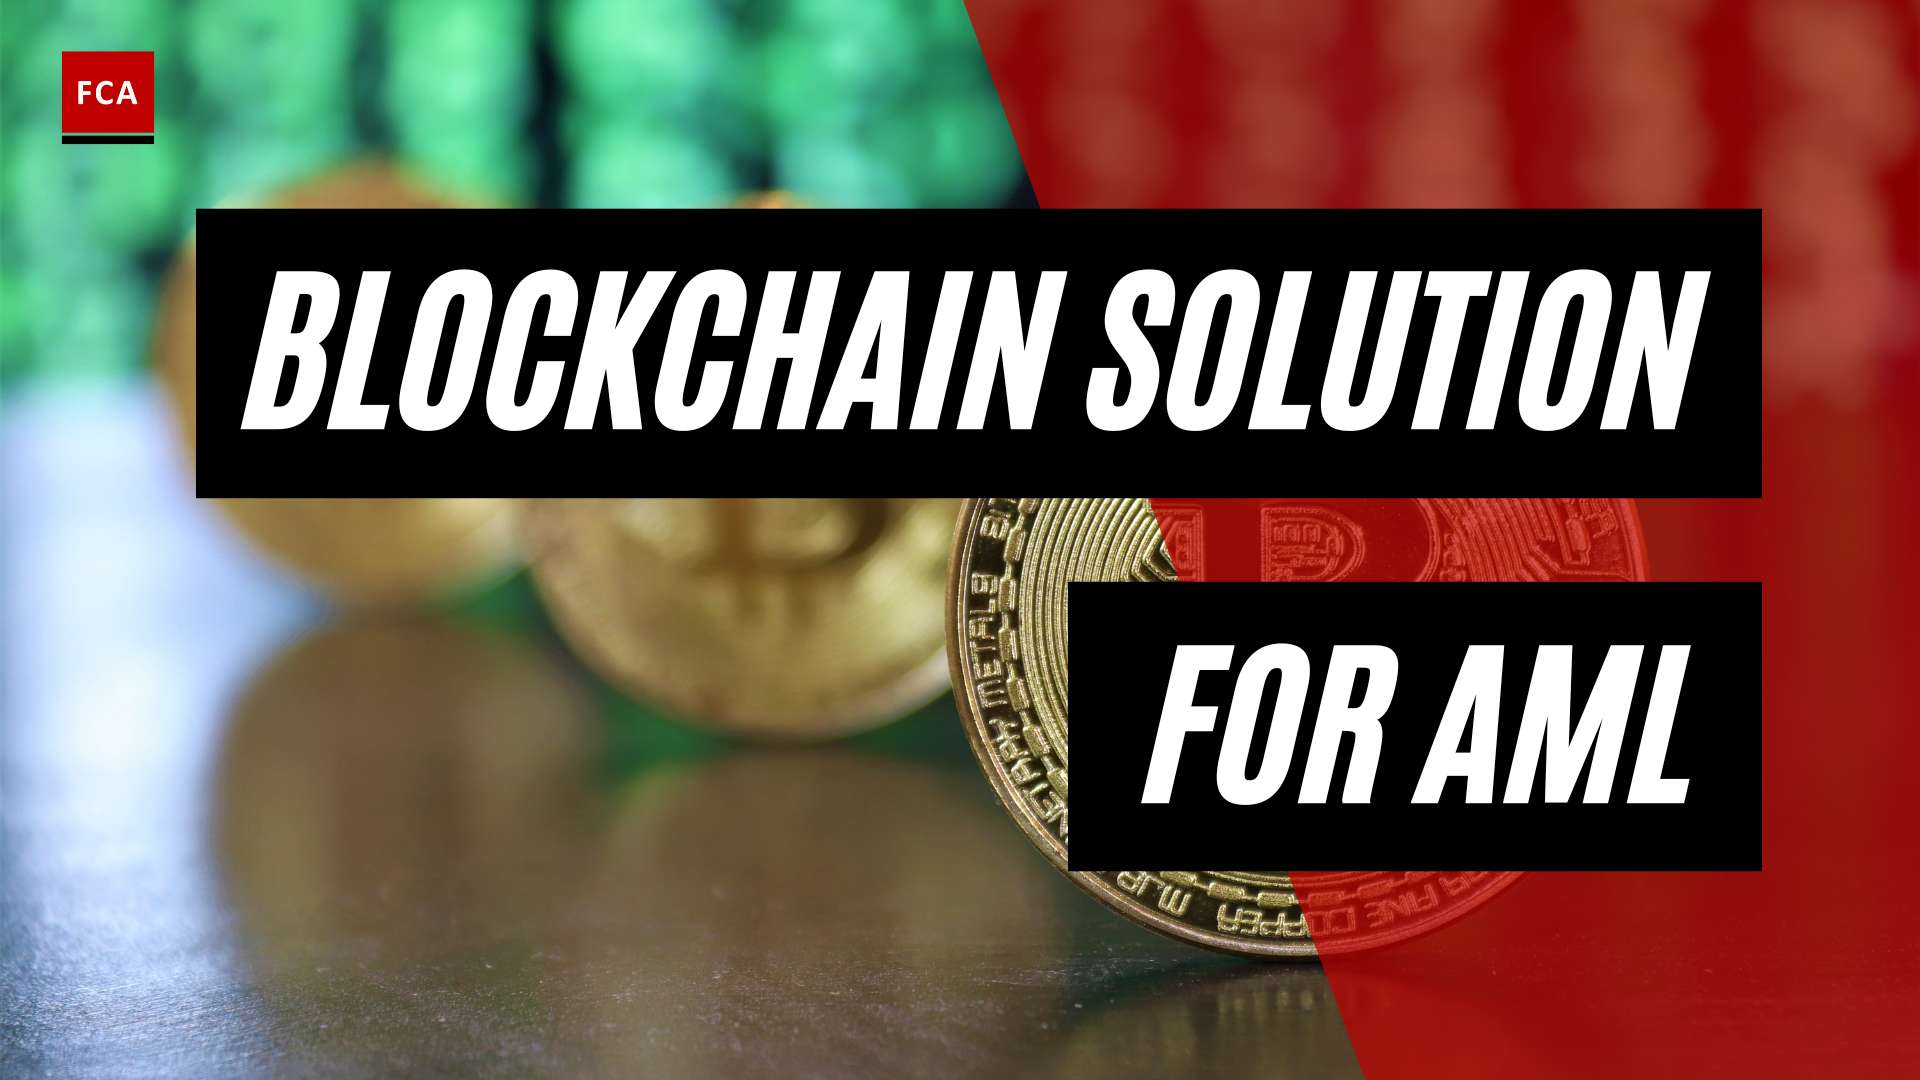 Breaking Barriers: How Blockchain Solutions Are Tackling Aml